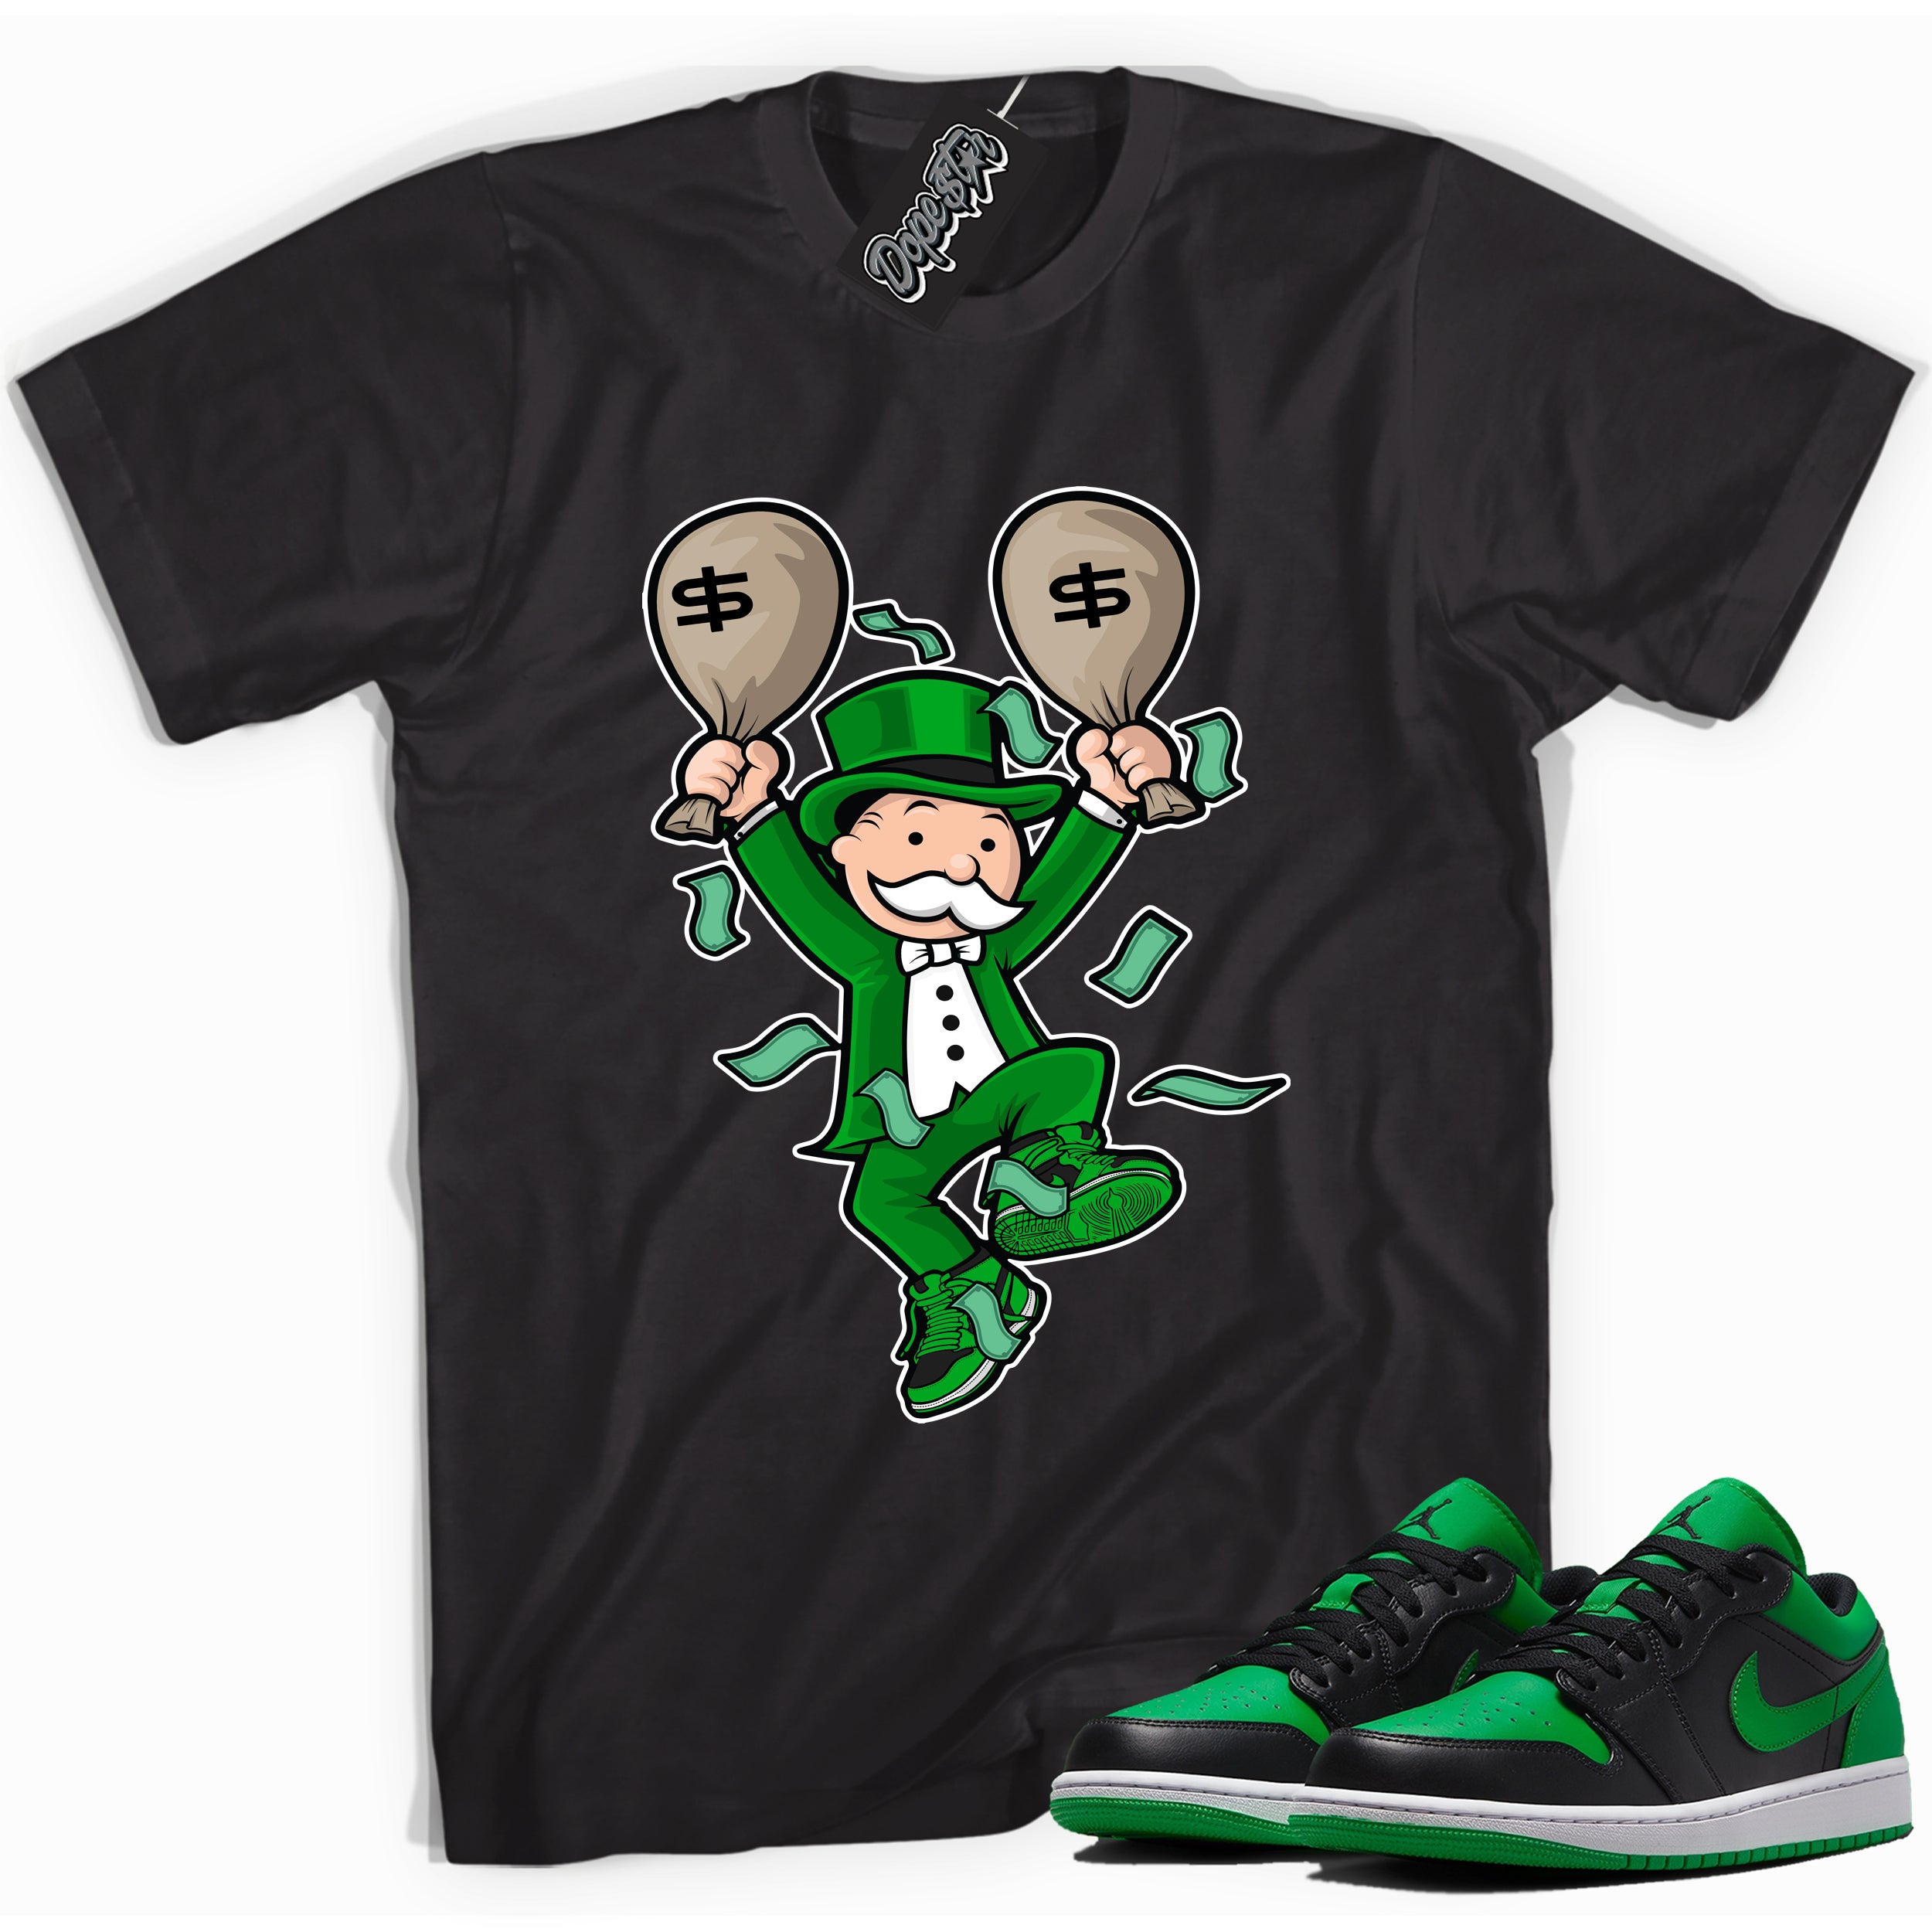 Cool black graphic tee with 'monopoly man' print, that perfectly matches Air Jordan 1 Low Lucky Green sneakers